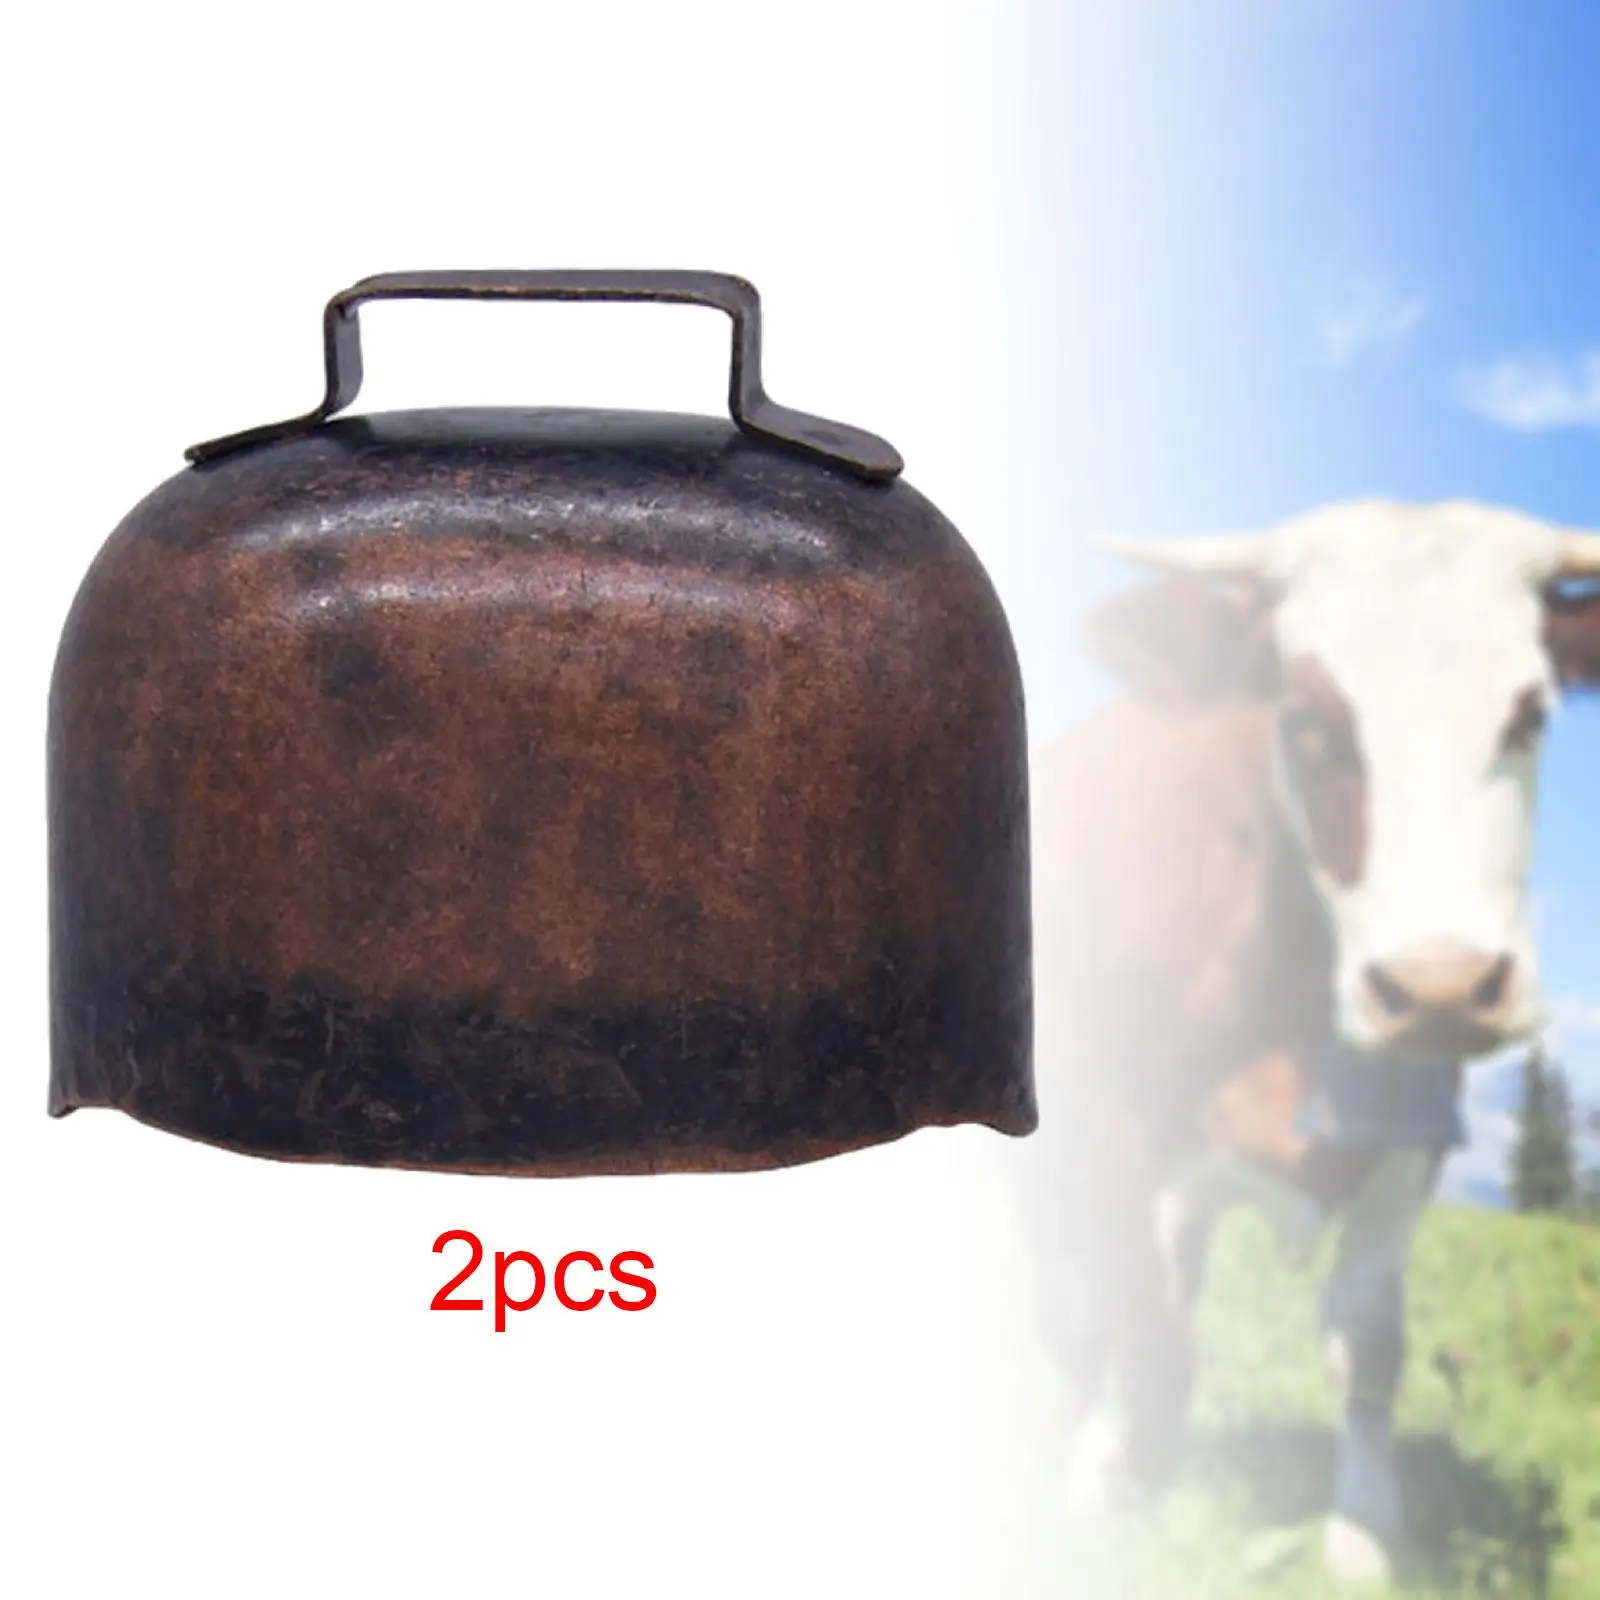 2x Cow Bells Small Vintage Style Ornament Grazing Bell, Anti Lost Accessories for Farm Animals Sheep Horse Cow Pets Supplies